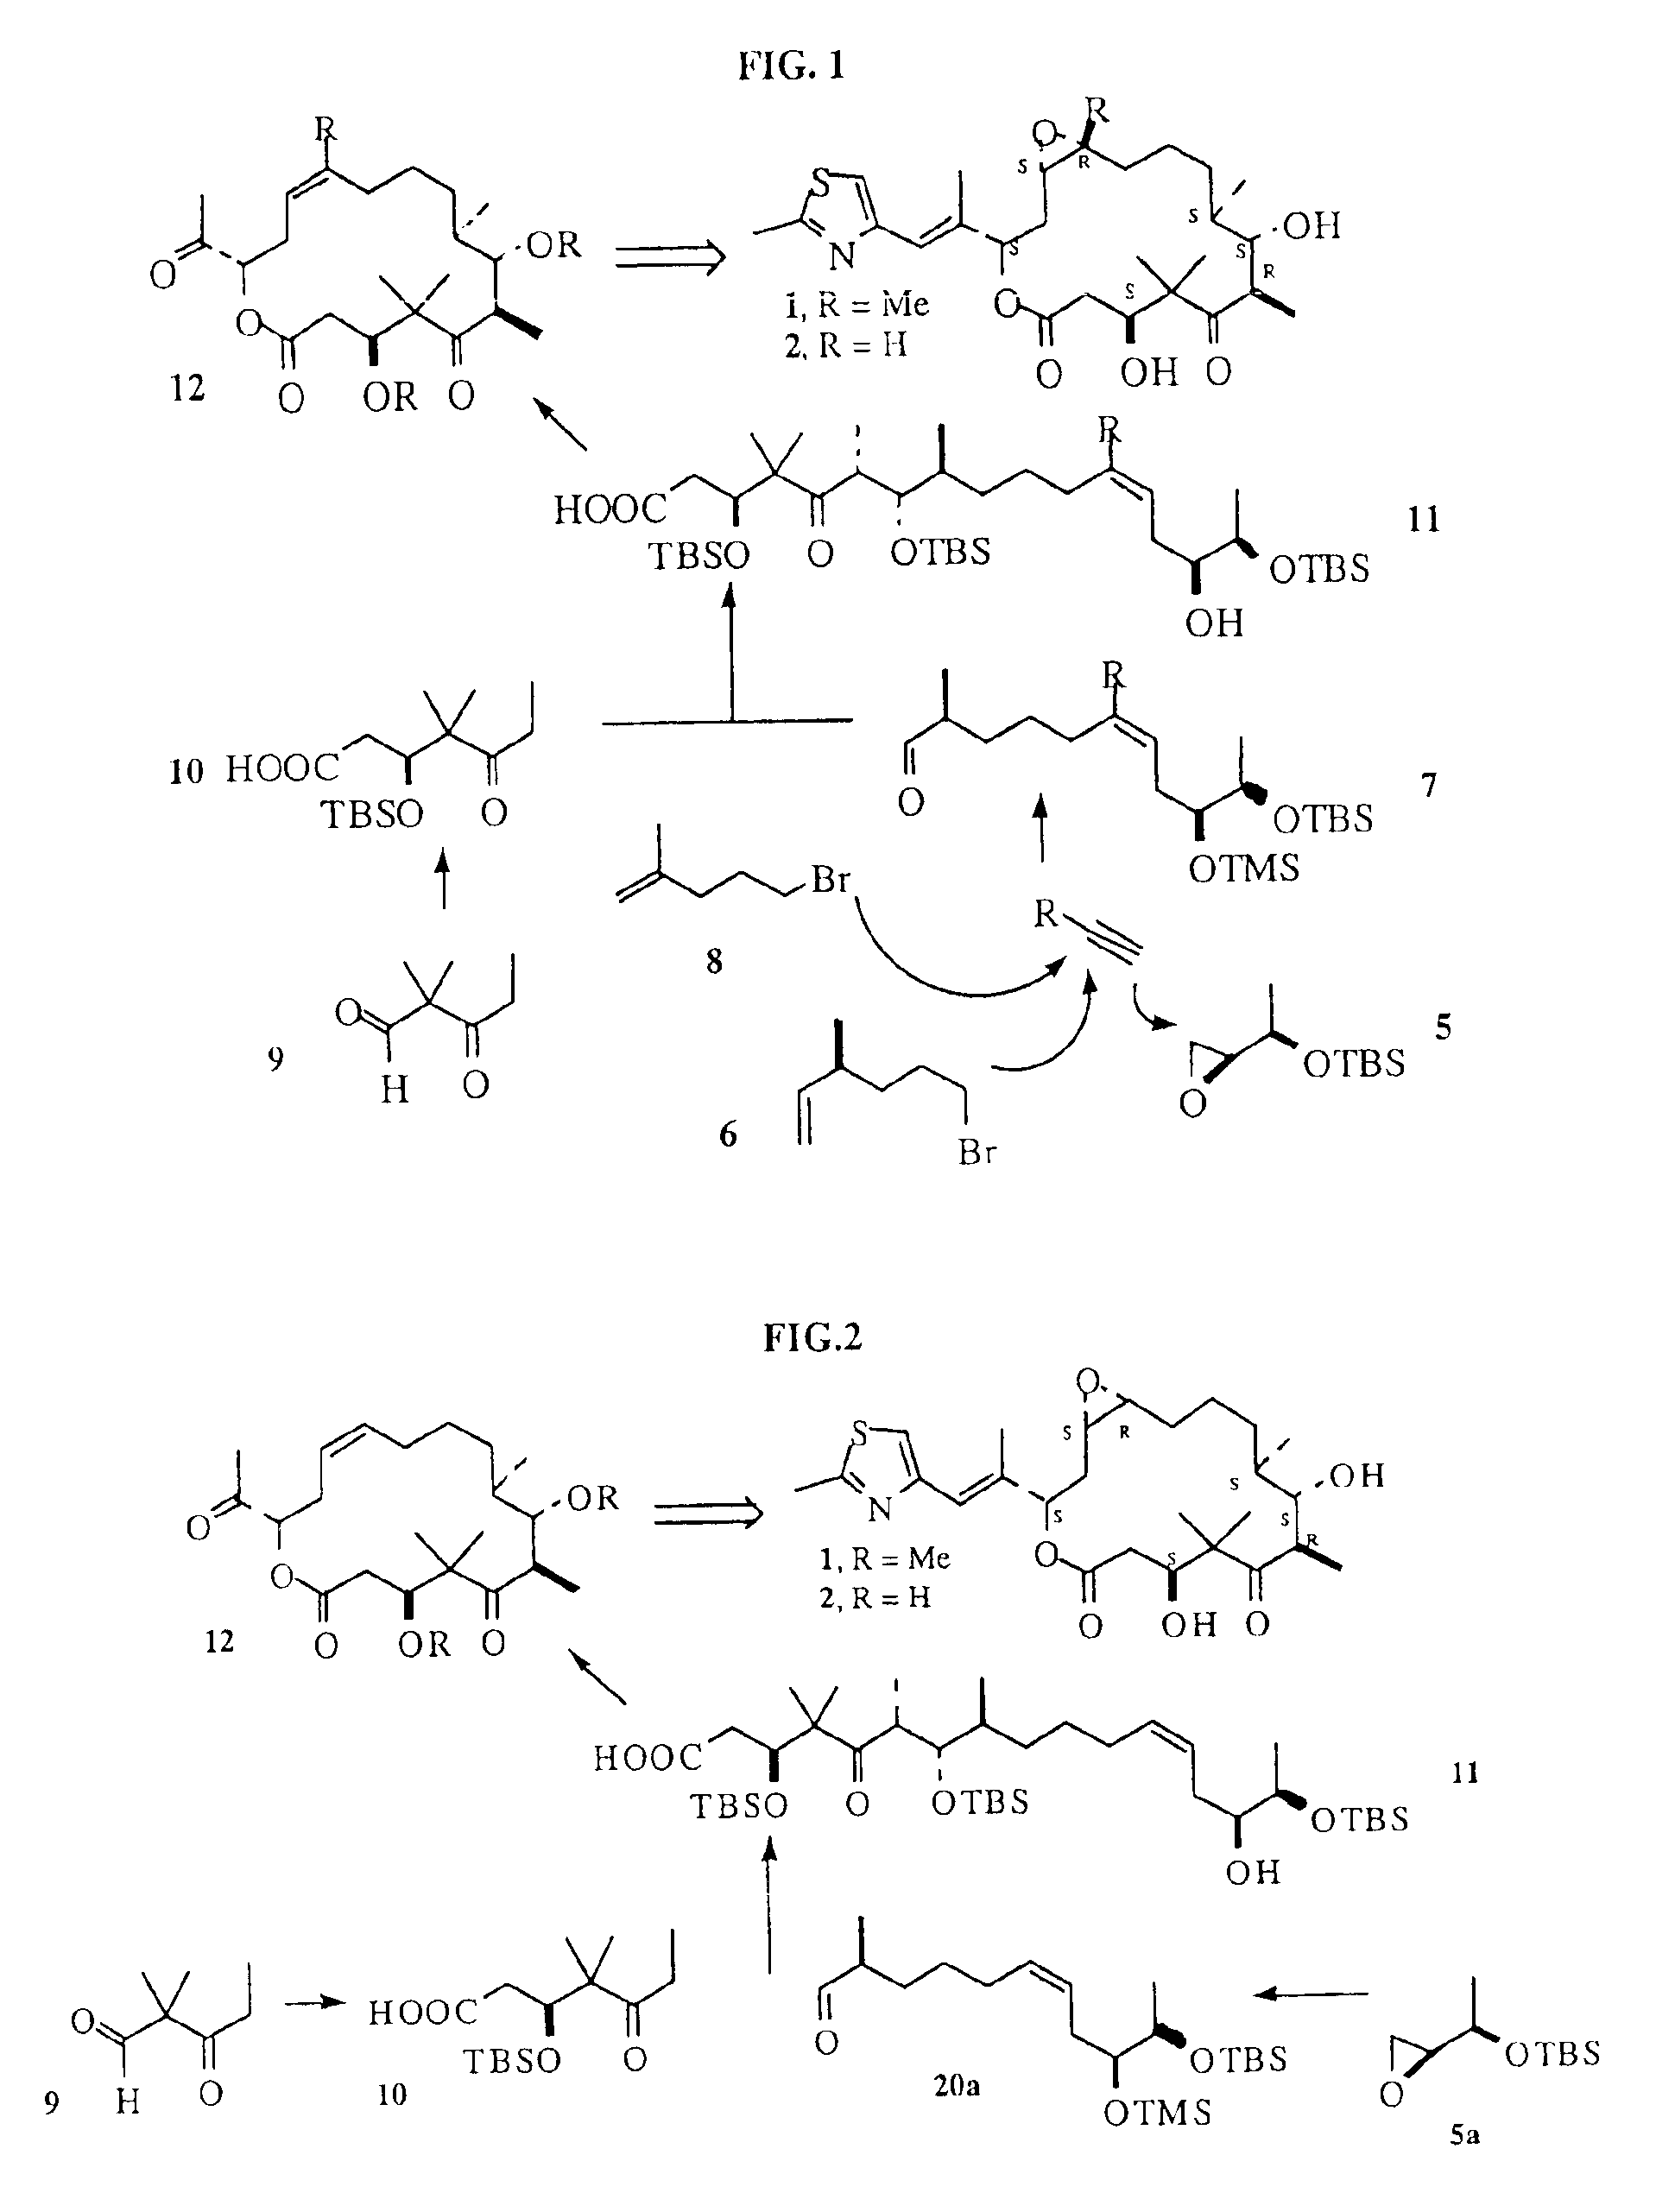 Synthesis of epothilones and related analogs